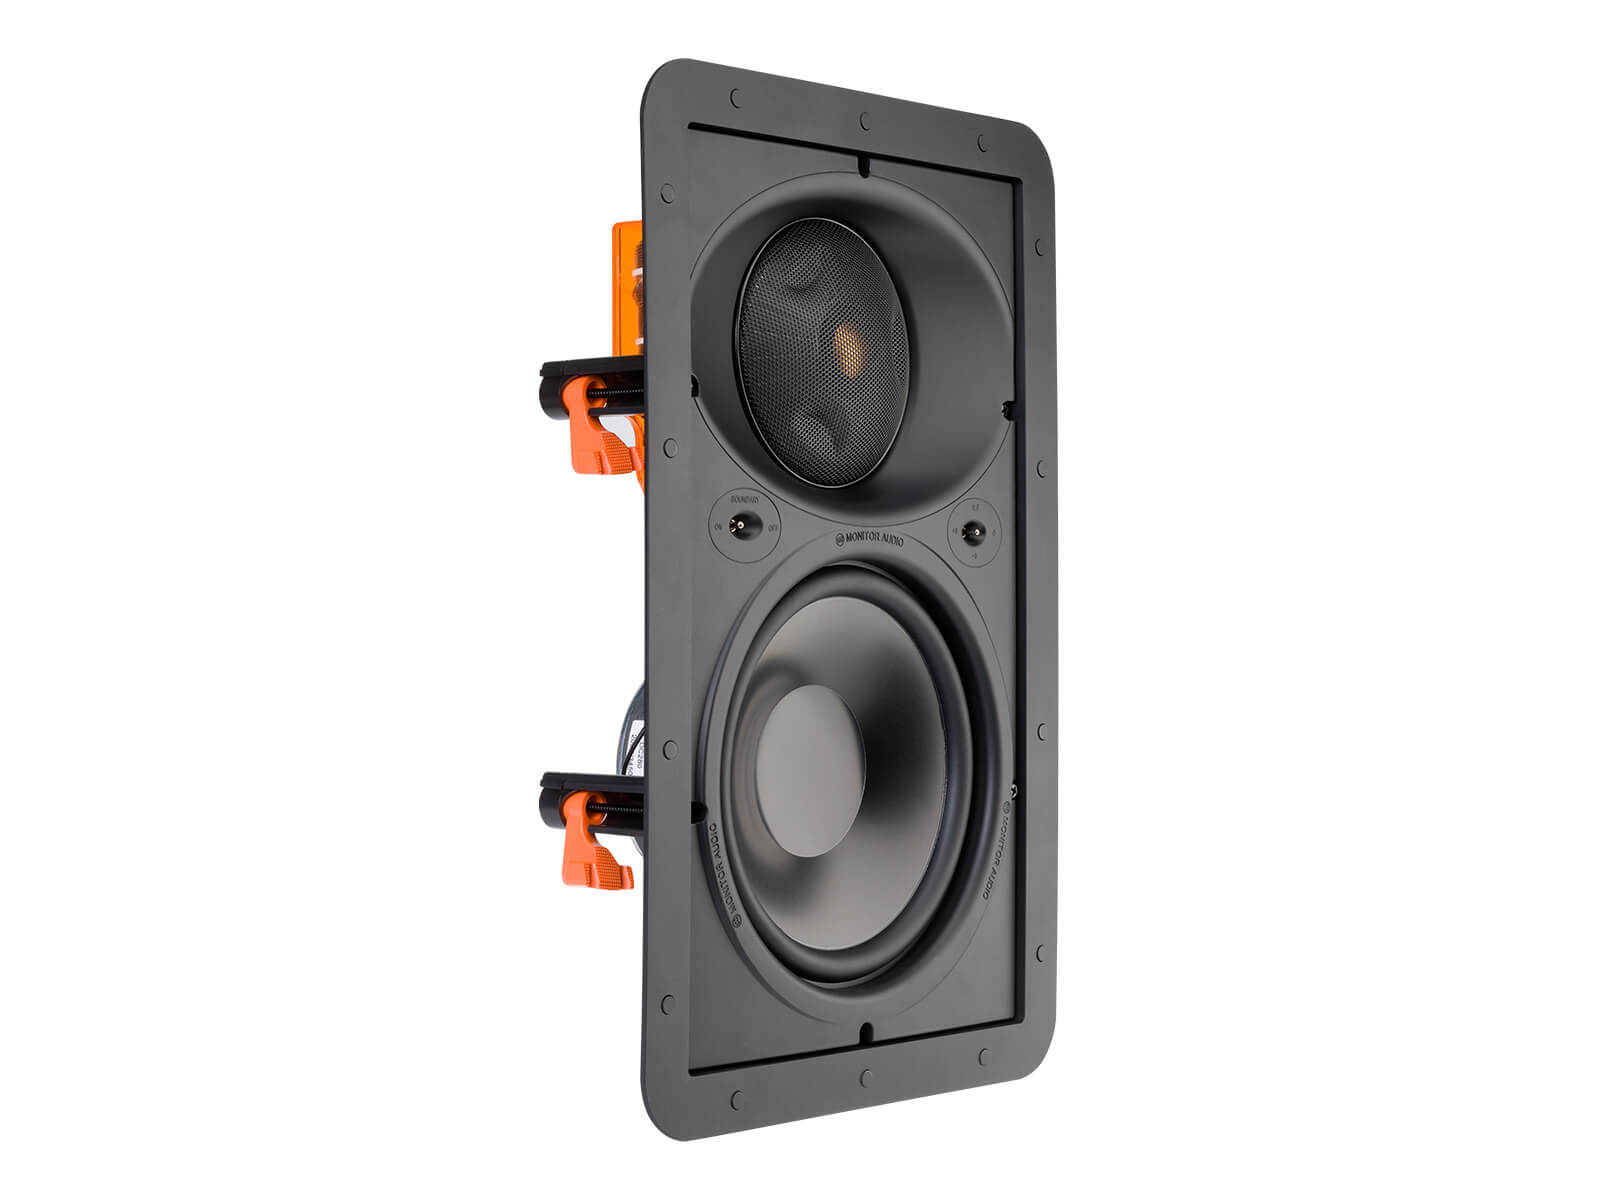 Core W280-IDC, front ISO, grille-less in-wall speakers.